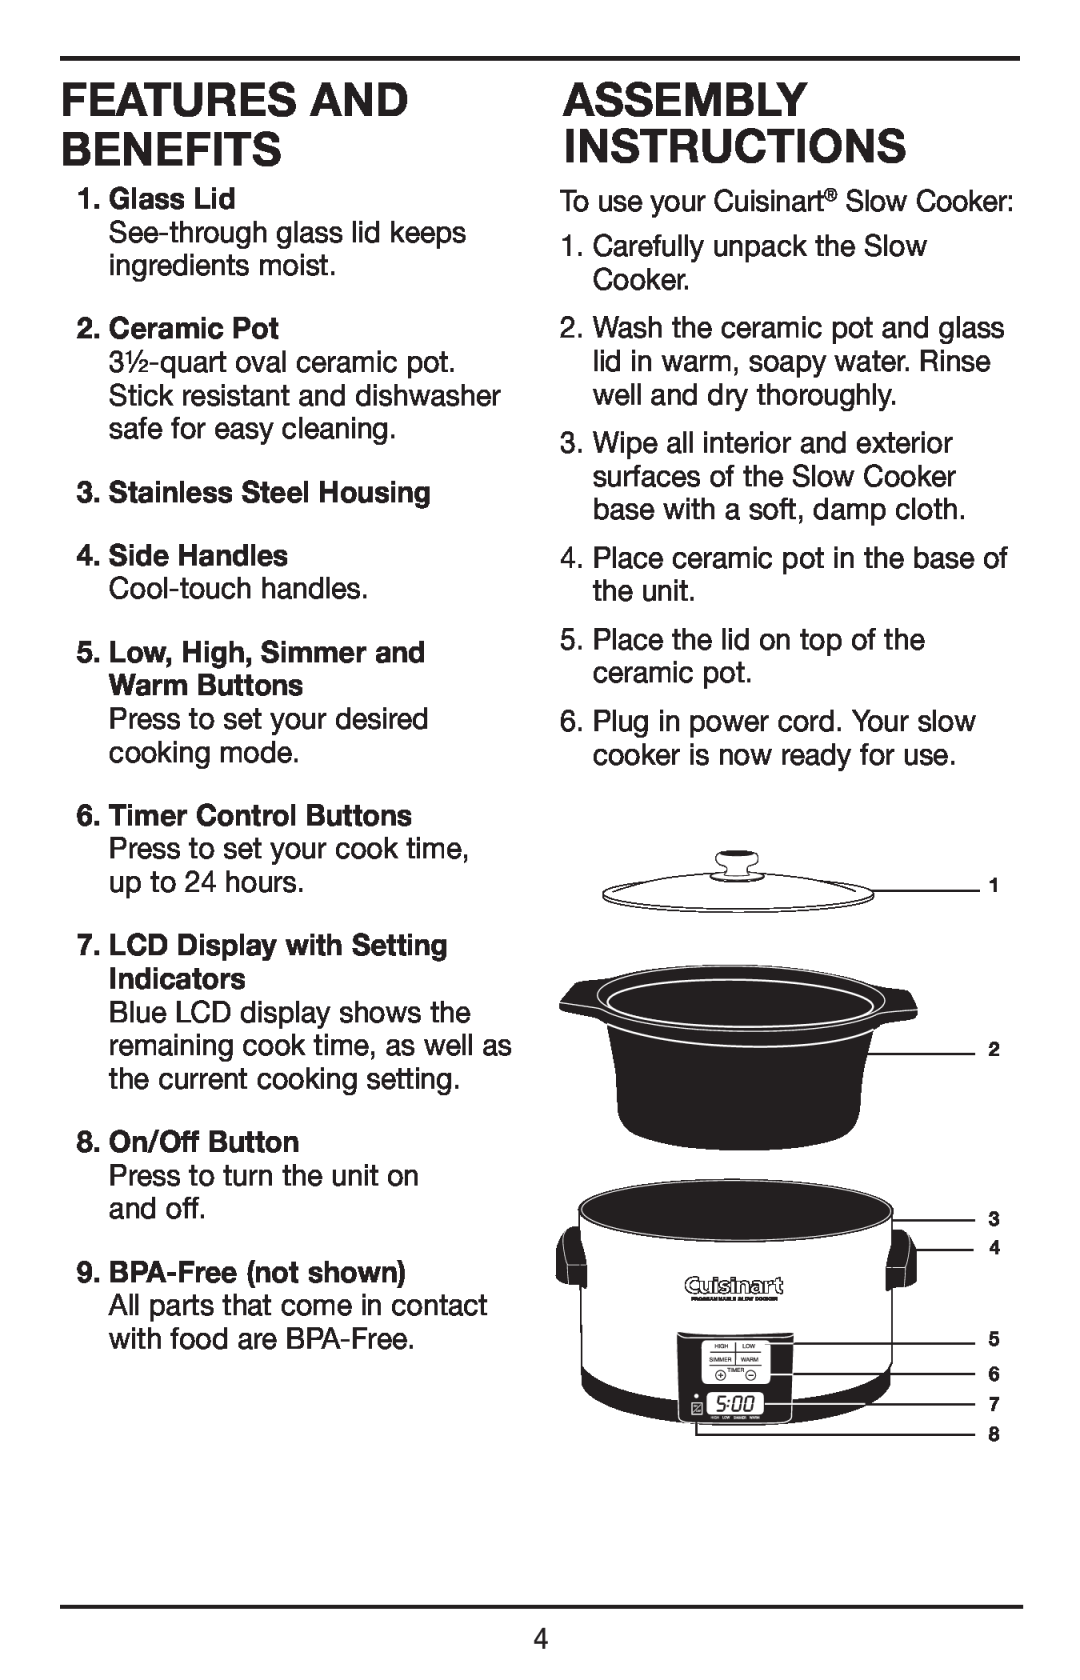 Cuisinart PSC-350 manual FEATURES AND Benefits, Assembly Instructions, Glass Lid, Ceramic Pot, Stainless Steel Housing 